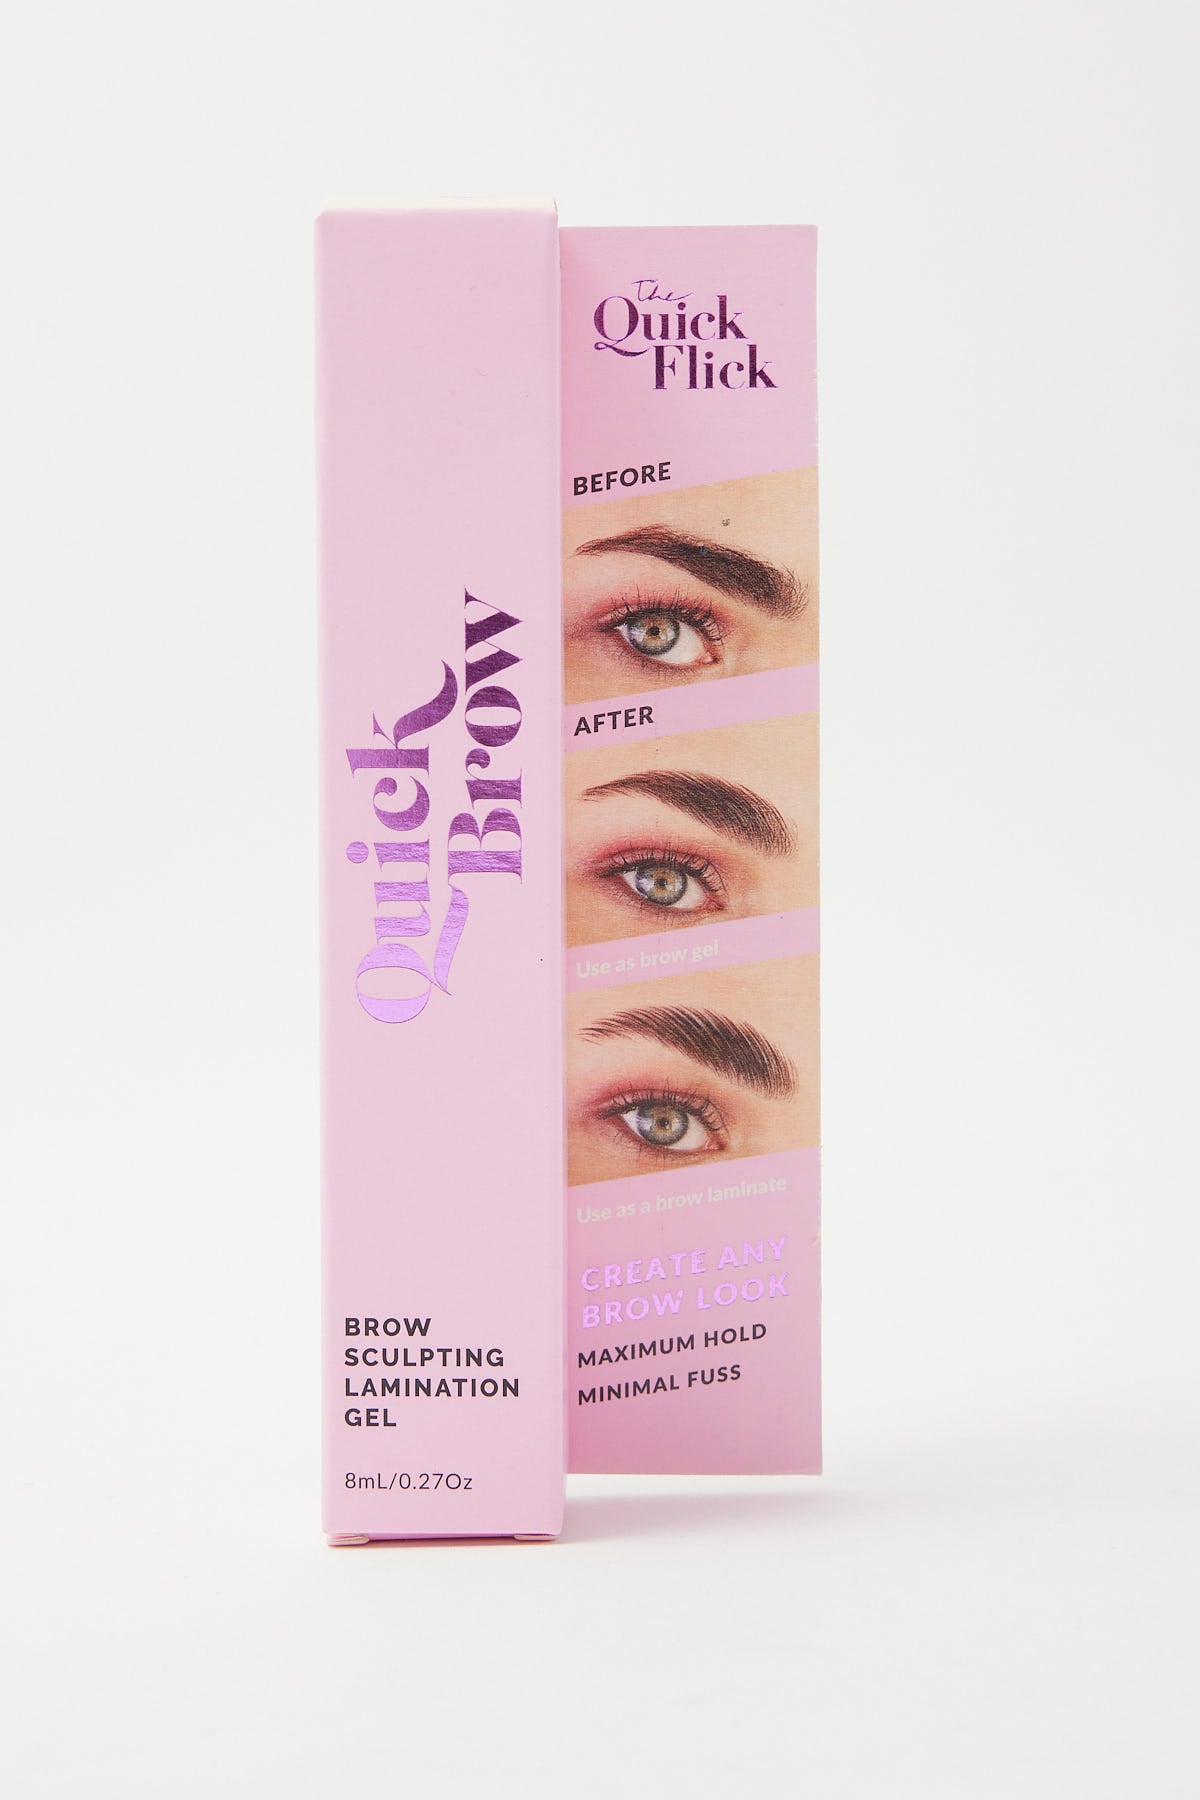 The Quick Flick Quick Brow Sculpting Lamination Gel Clear